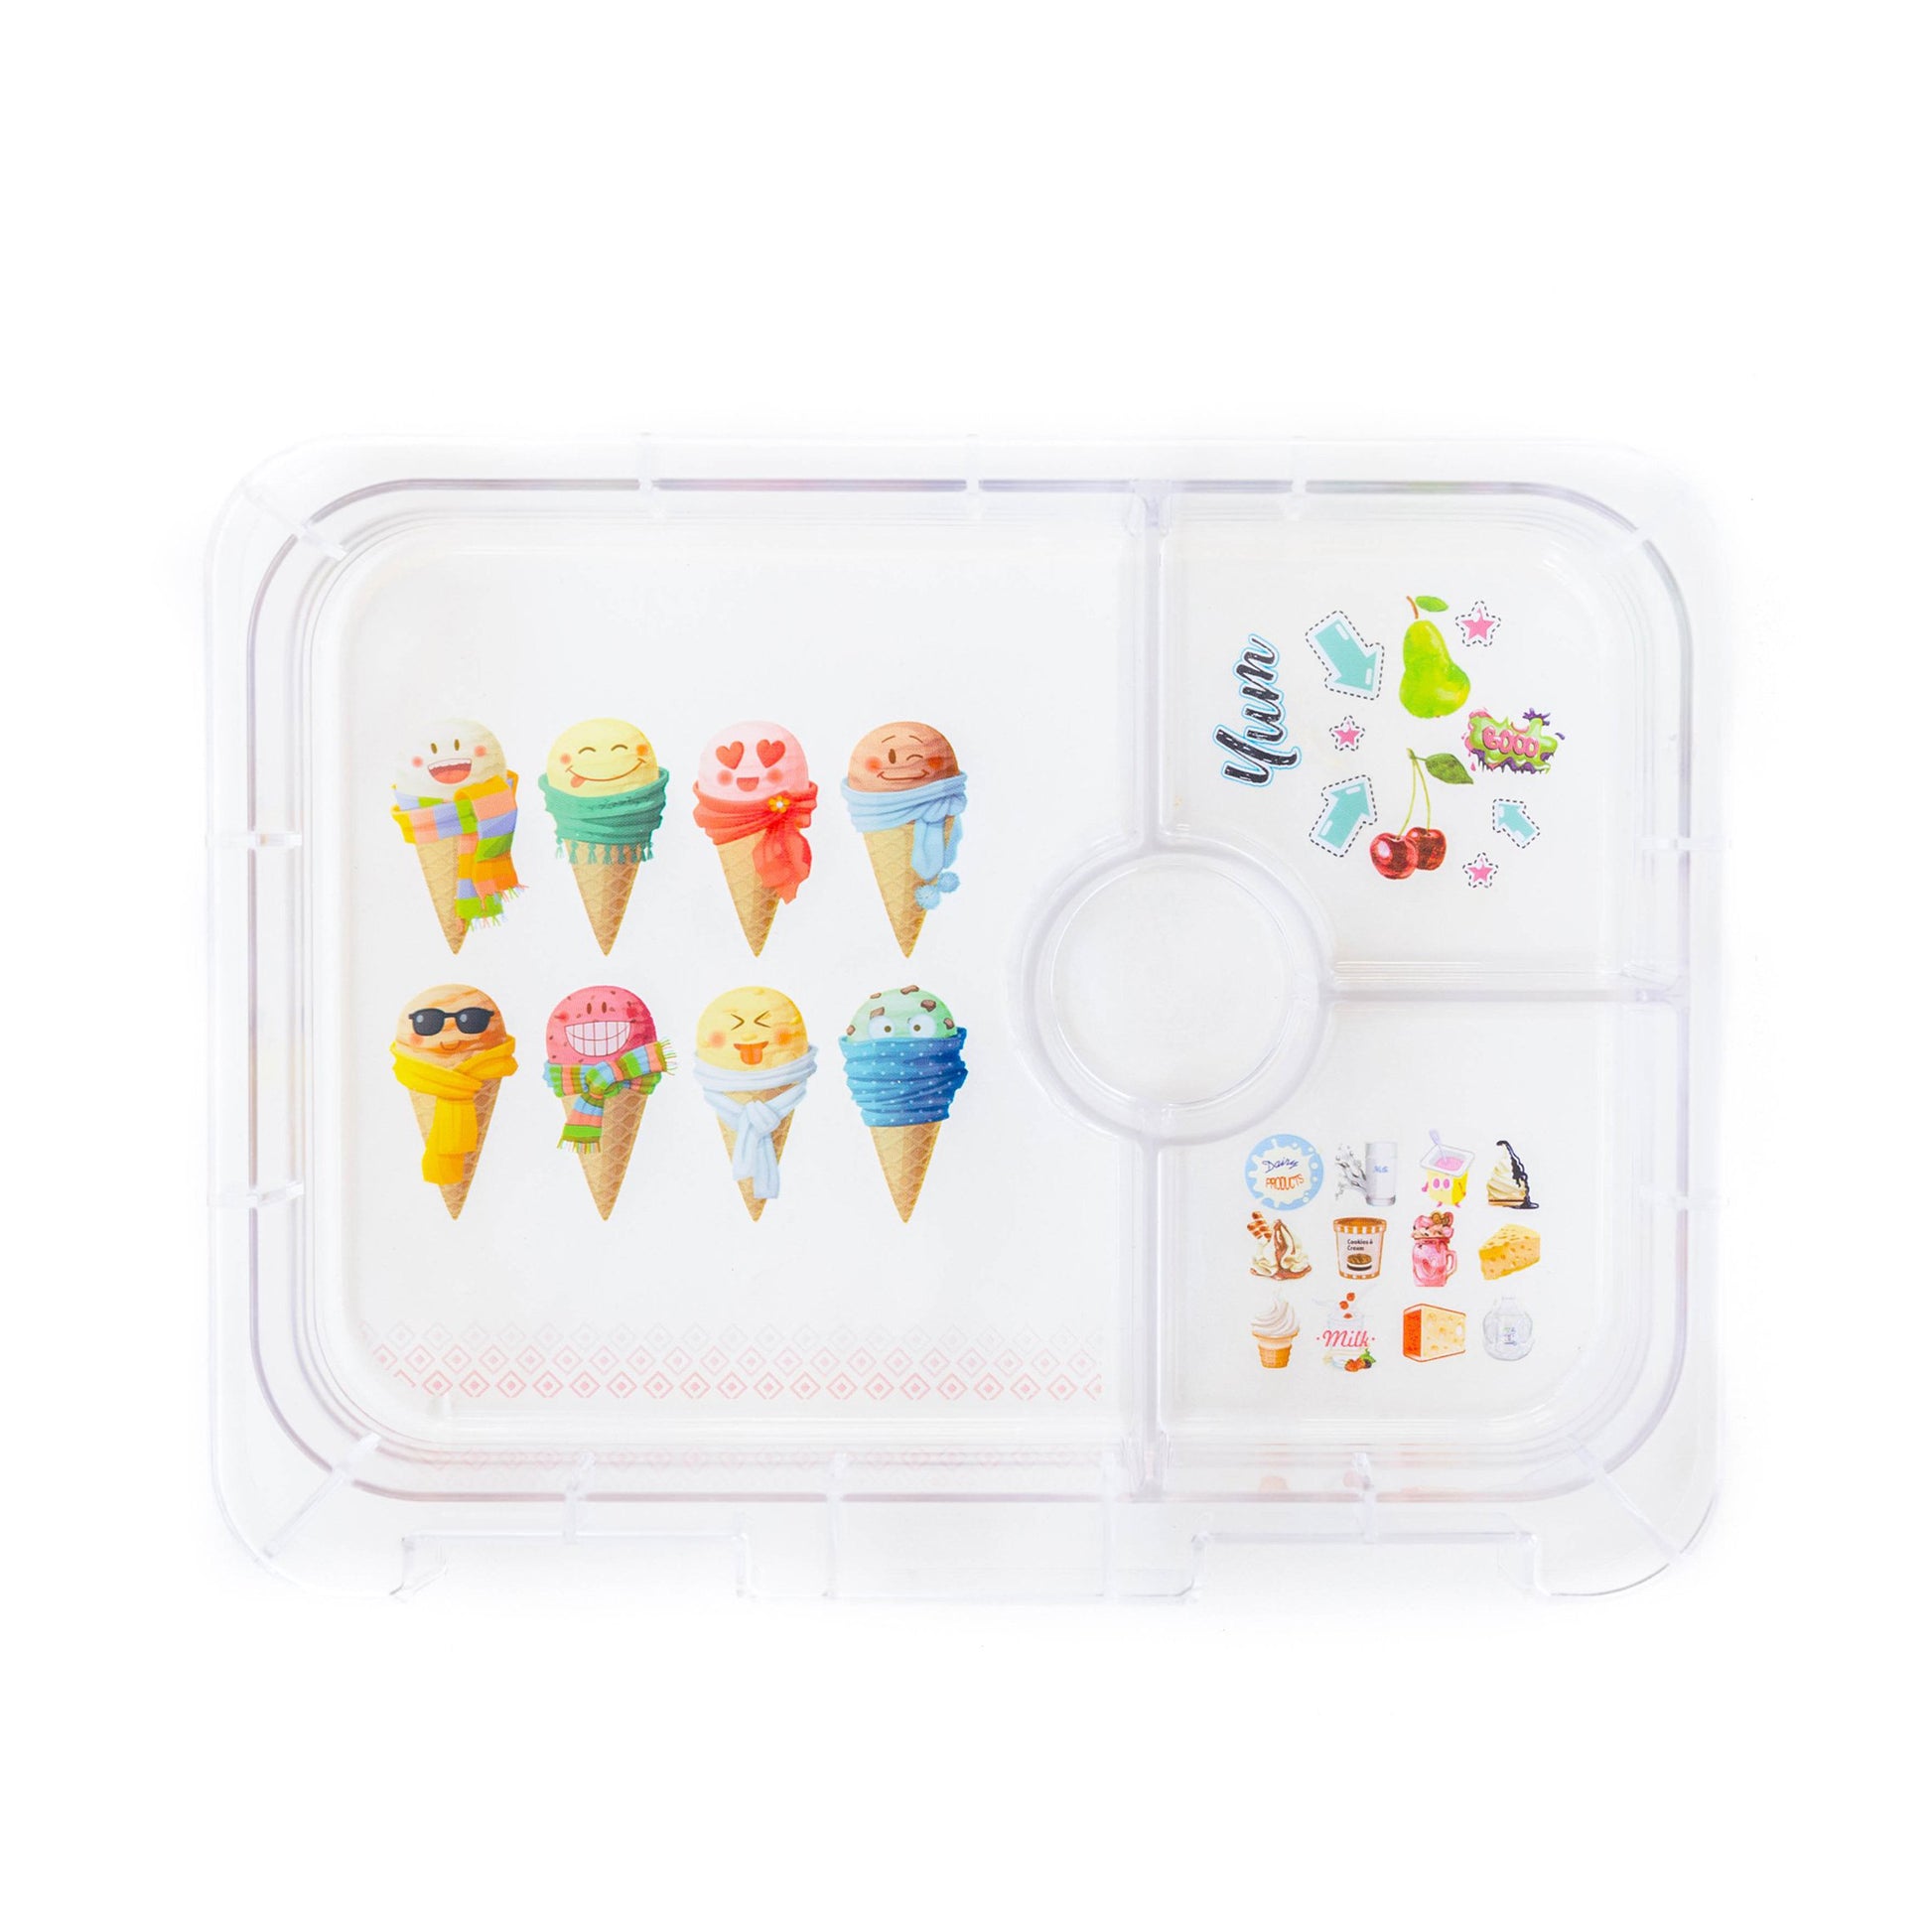 Citron Australia Kids Bento Lunchbox - 4 compartments With Accessories - Mermaid